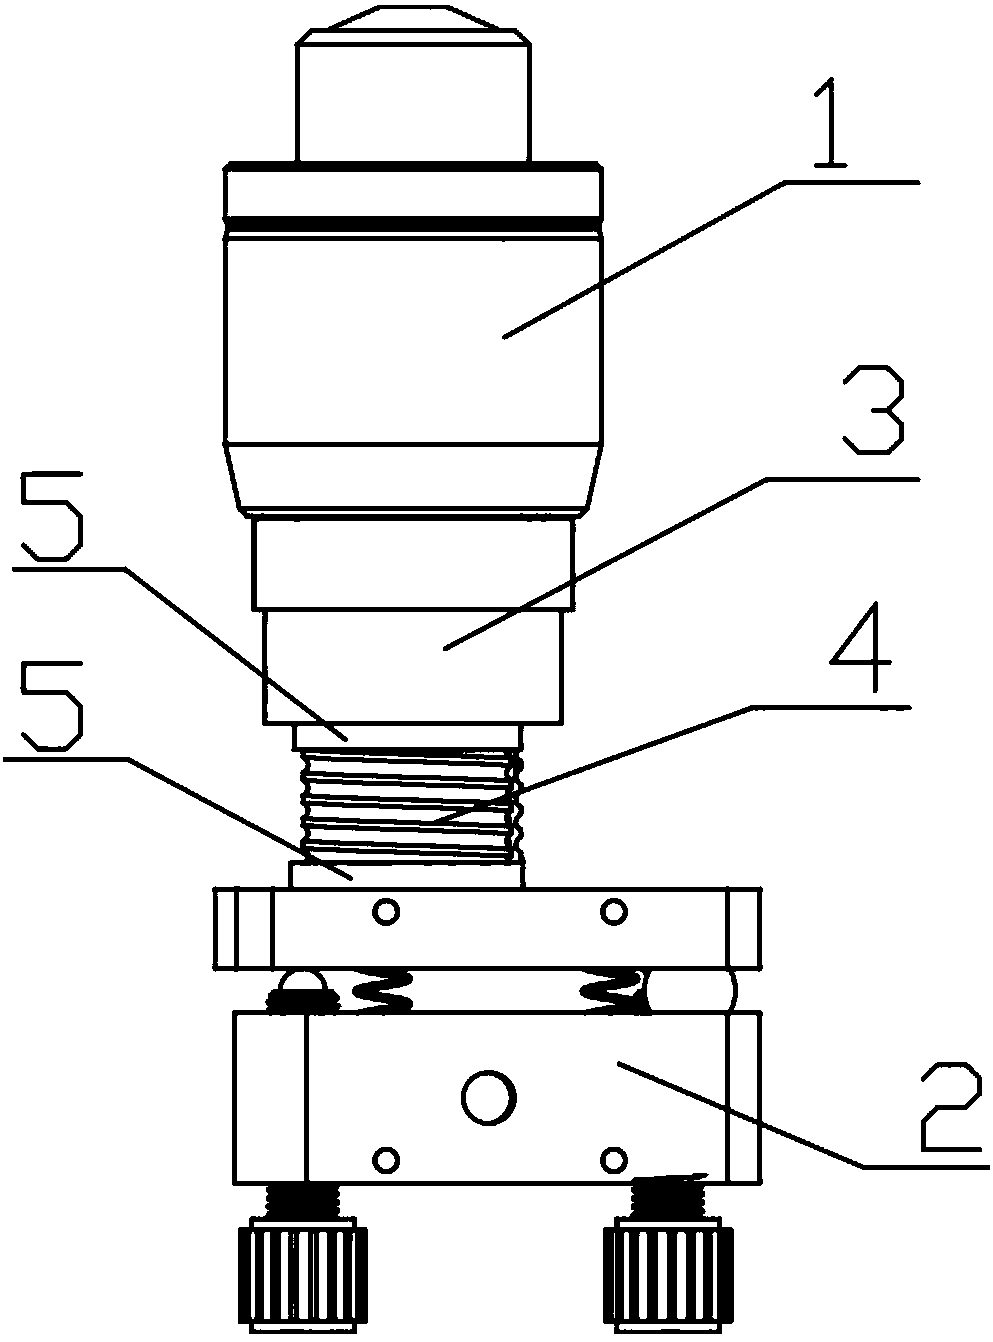 A microscopic objective lens focusing adaptation device